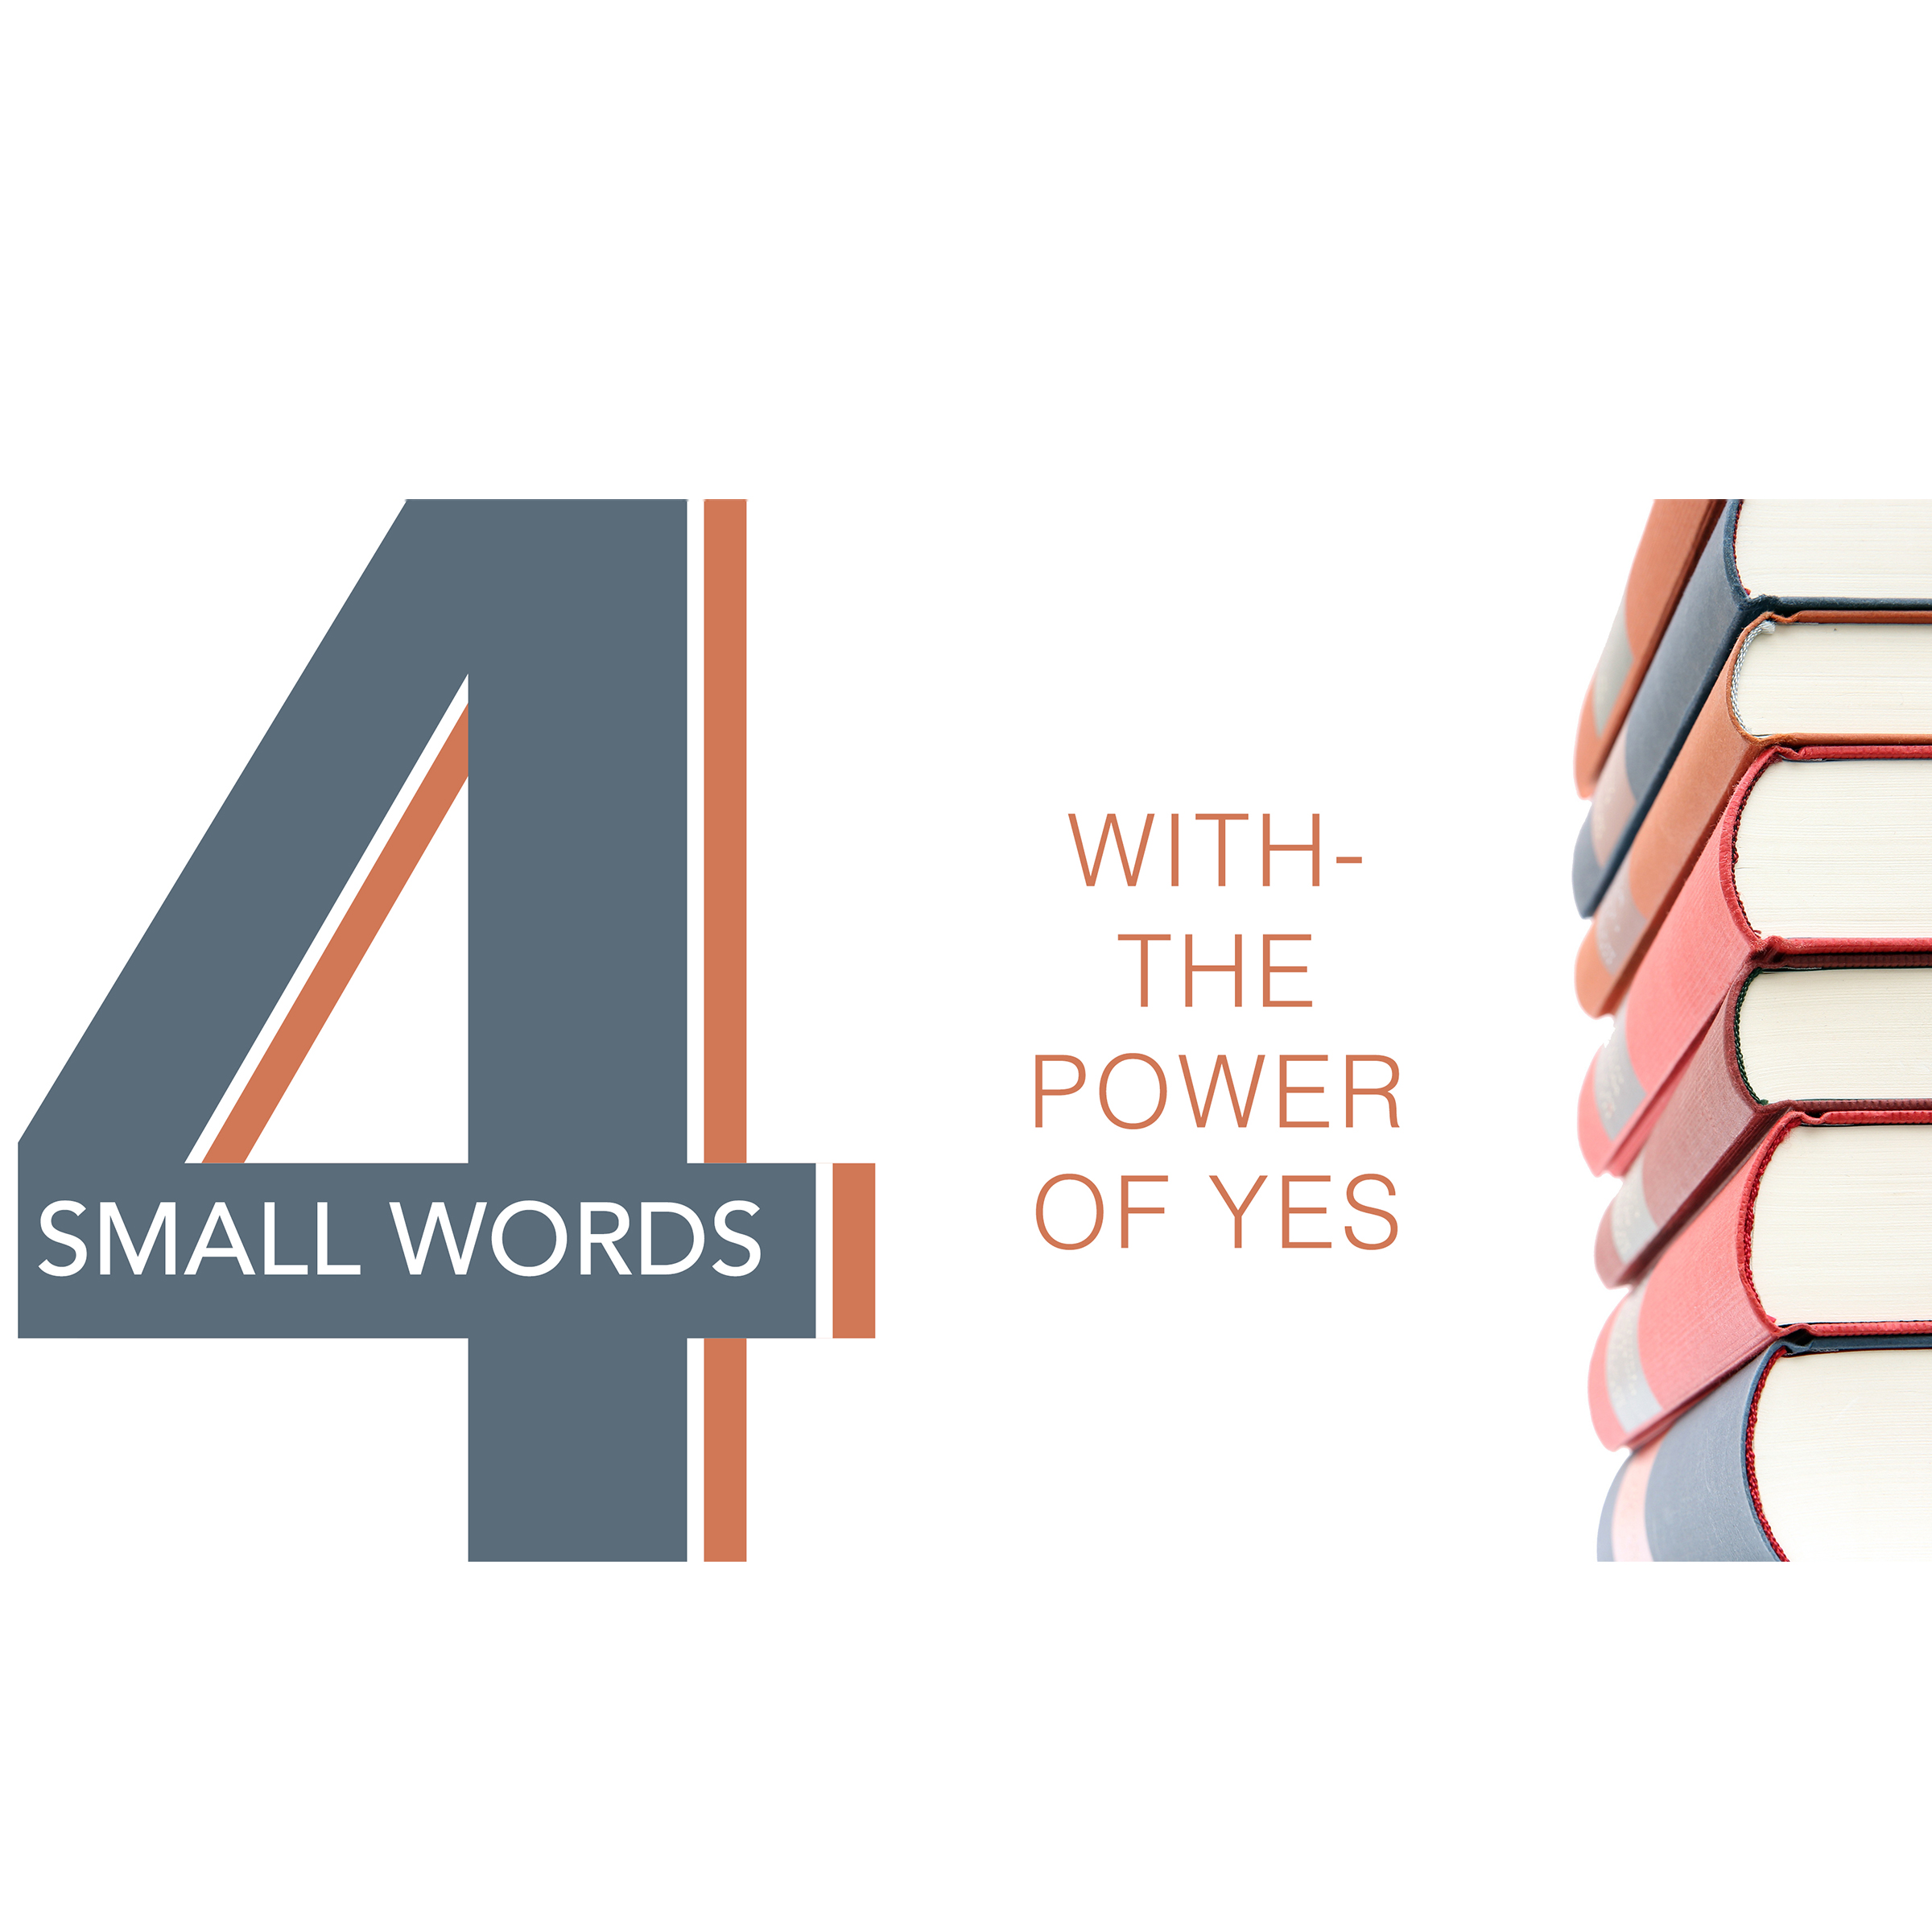 4 Small Words: With- The Power of Yes